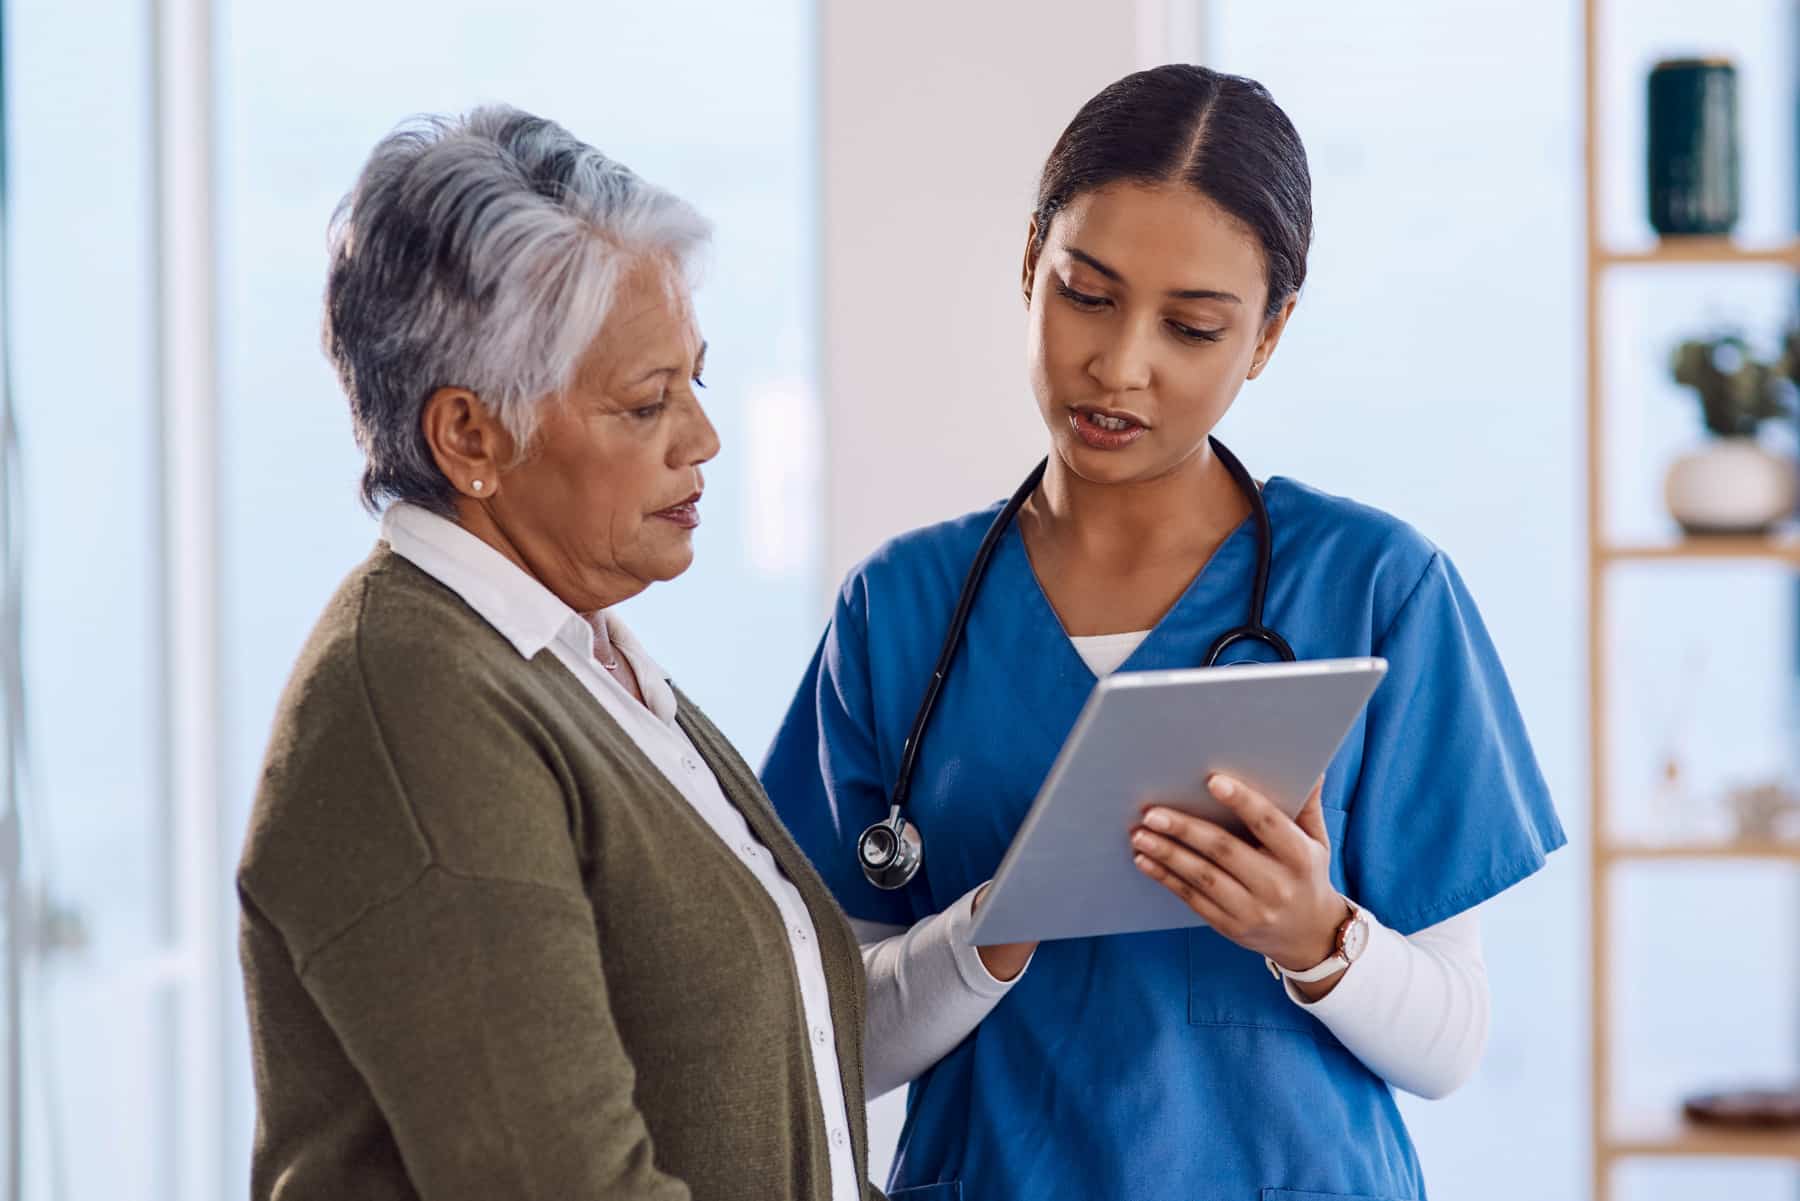 Medical professional reviewing data on tablet with patient